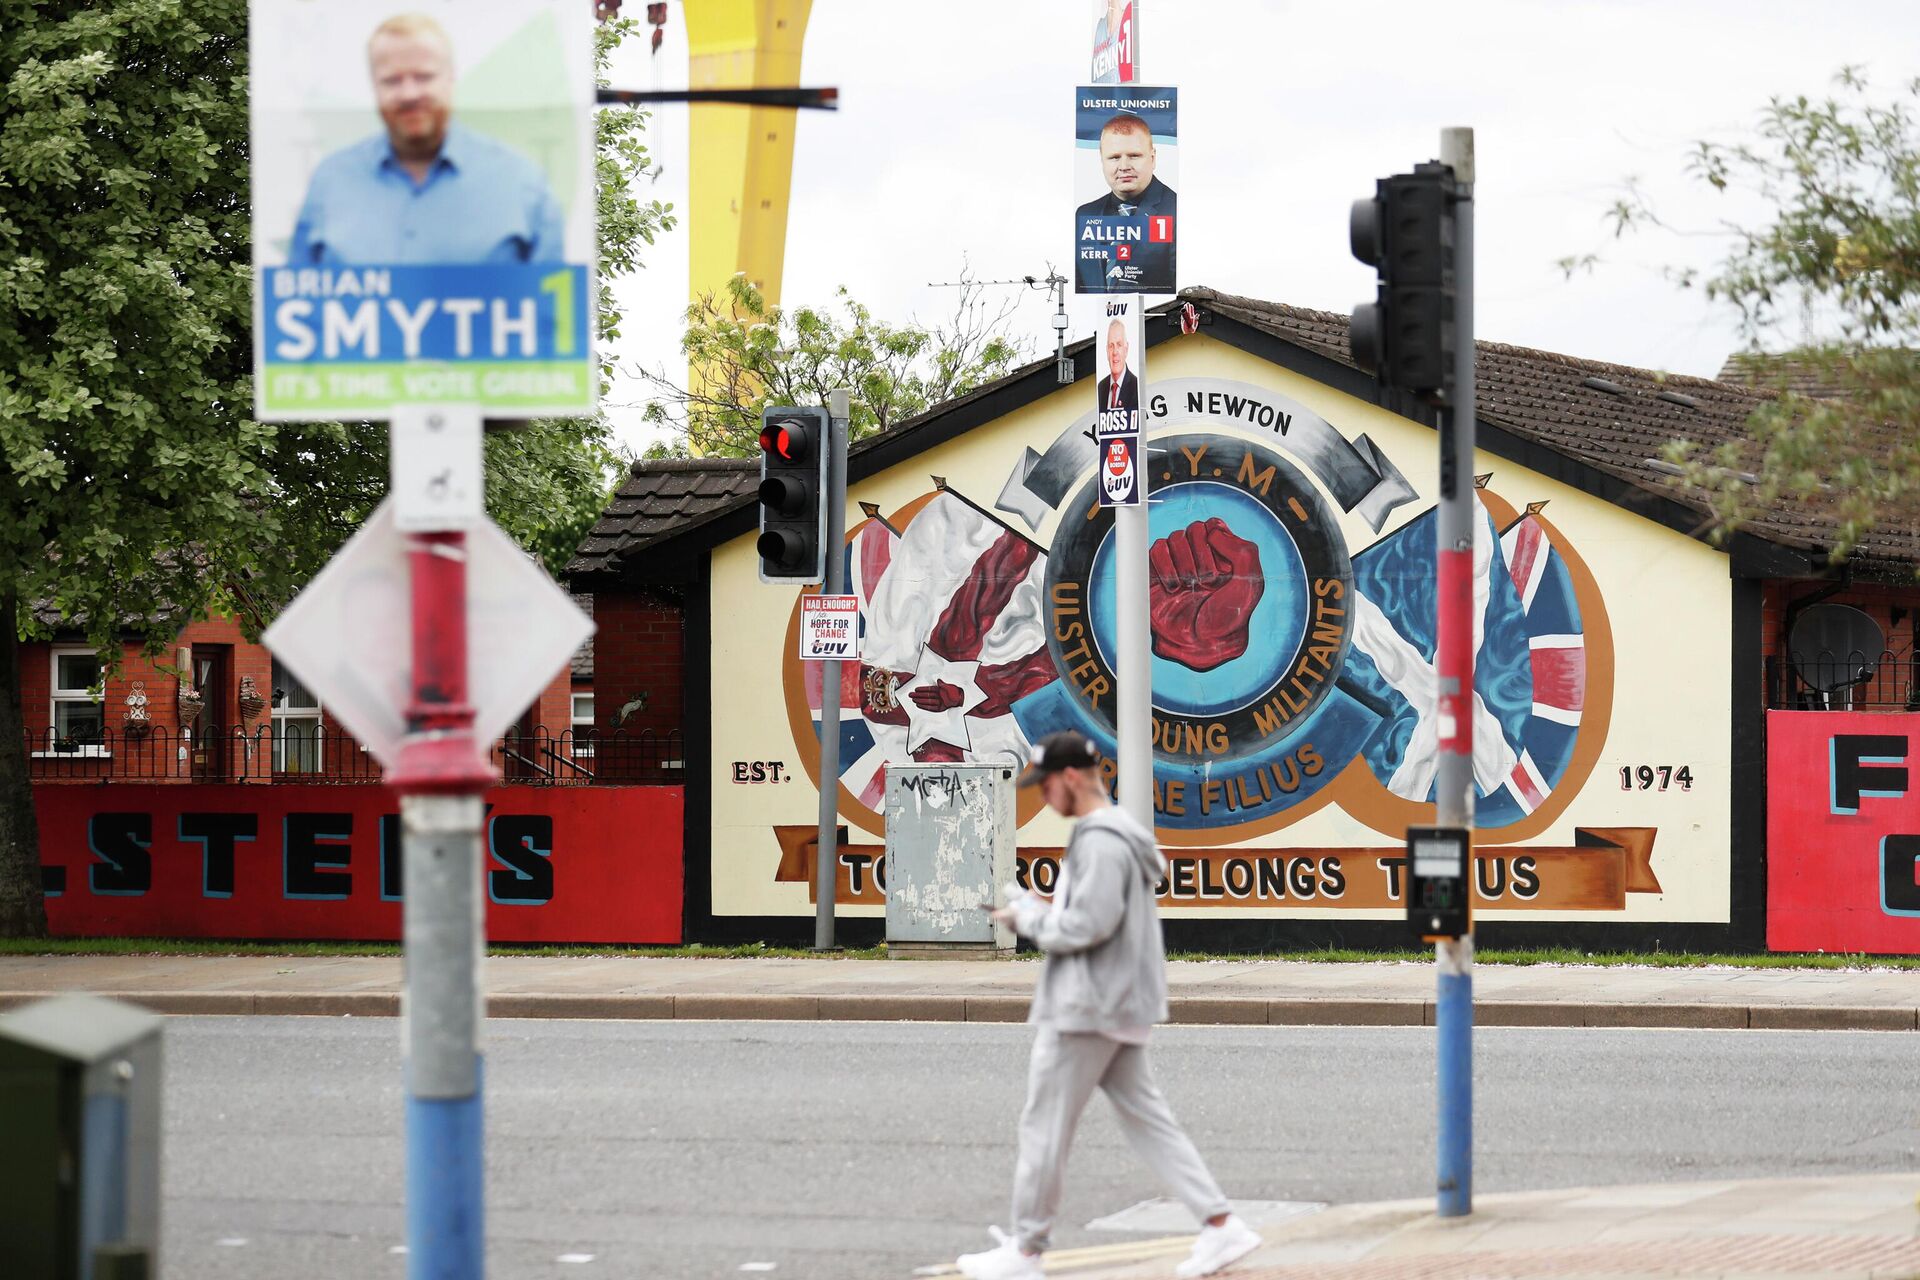 Election posters hang from lamp posts in the mainly Loyalist Newtownards road area of East Belfast, Northern Ireland, Monday, May 2, 2022, ahead of the May 5, 2022 local elections - Sputnik International, 1920, 10.05.2022